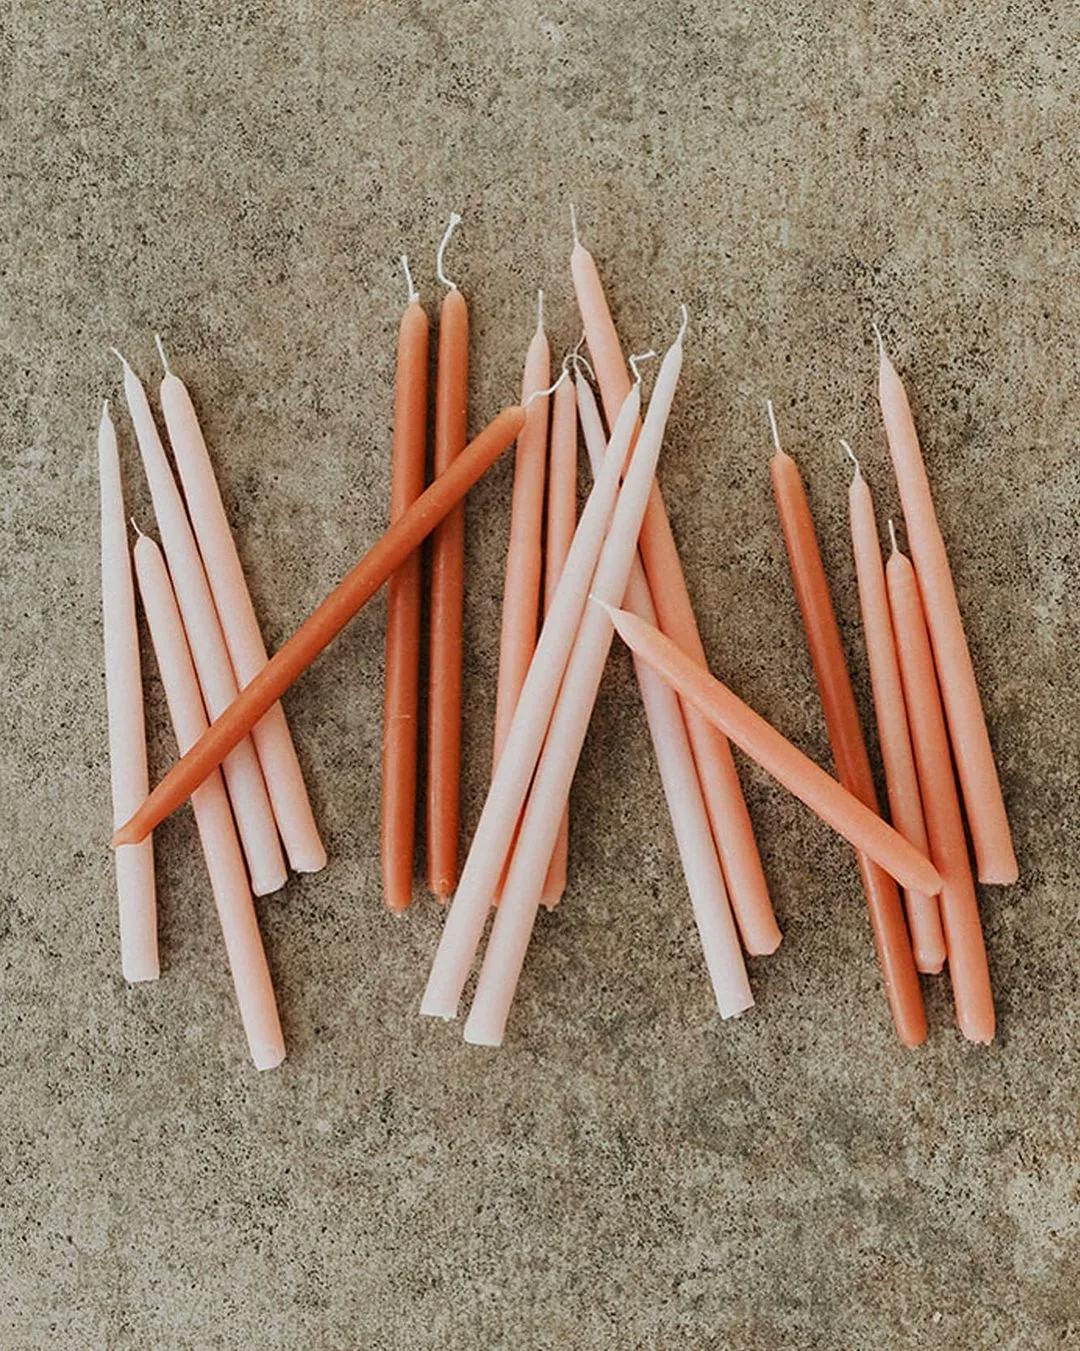 A collection of tapered candles in various shades of pink and orange are scattered on a textured, light brown surface. The candles vary slightly in length and thickness, and some have visible wicks while others do not.